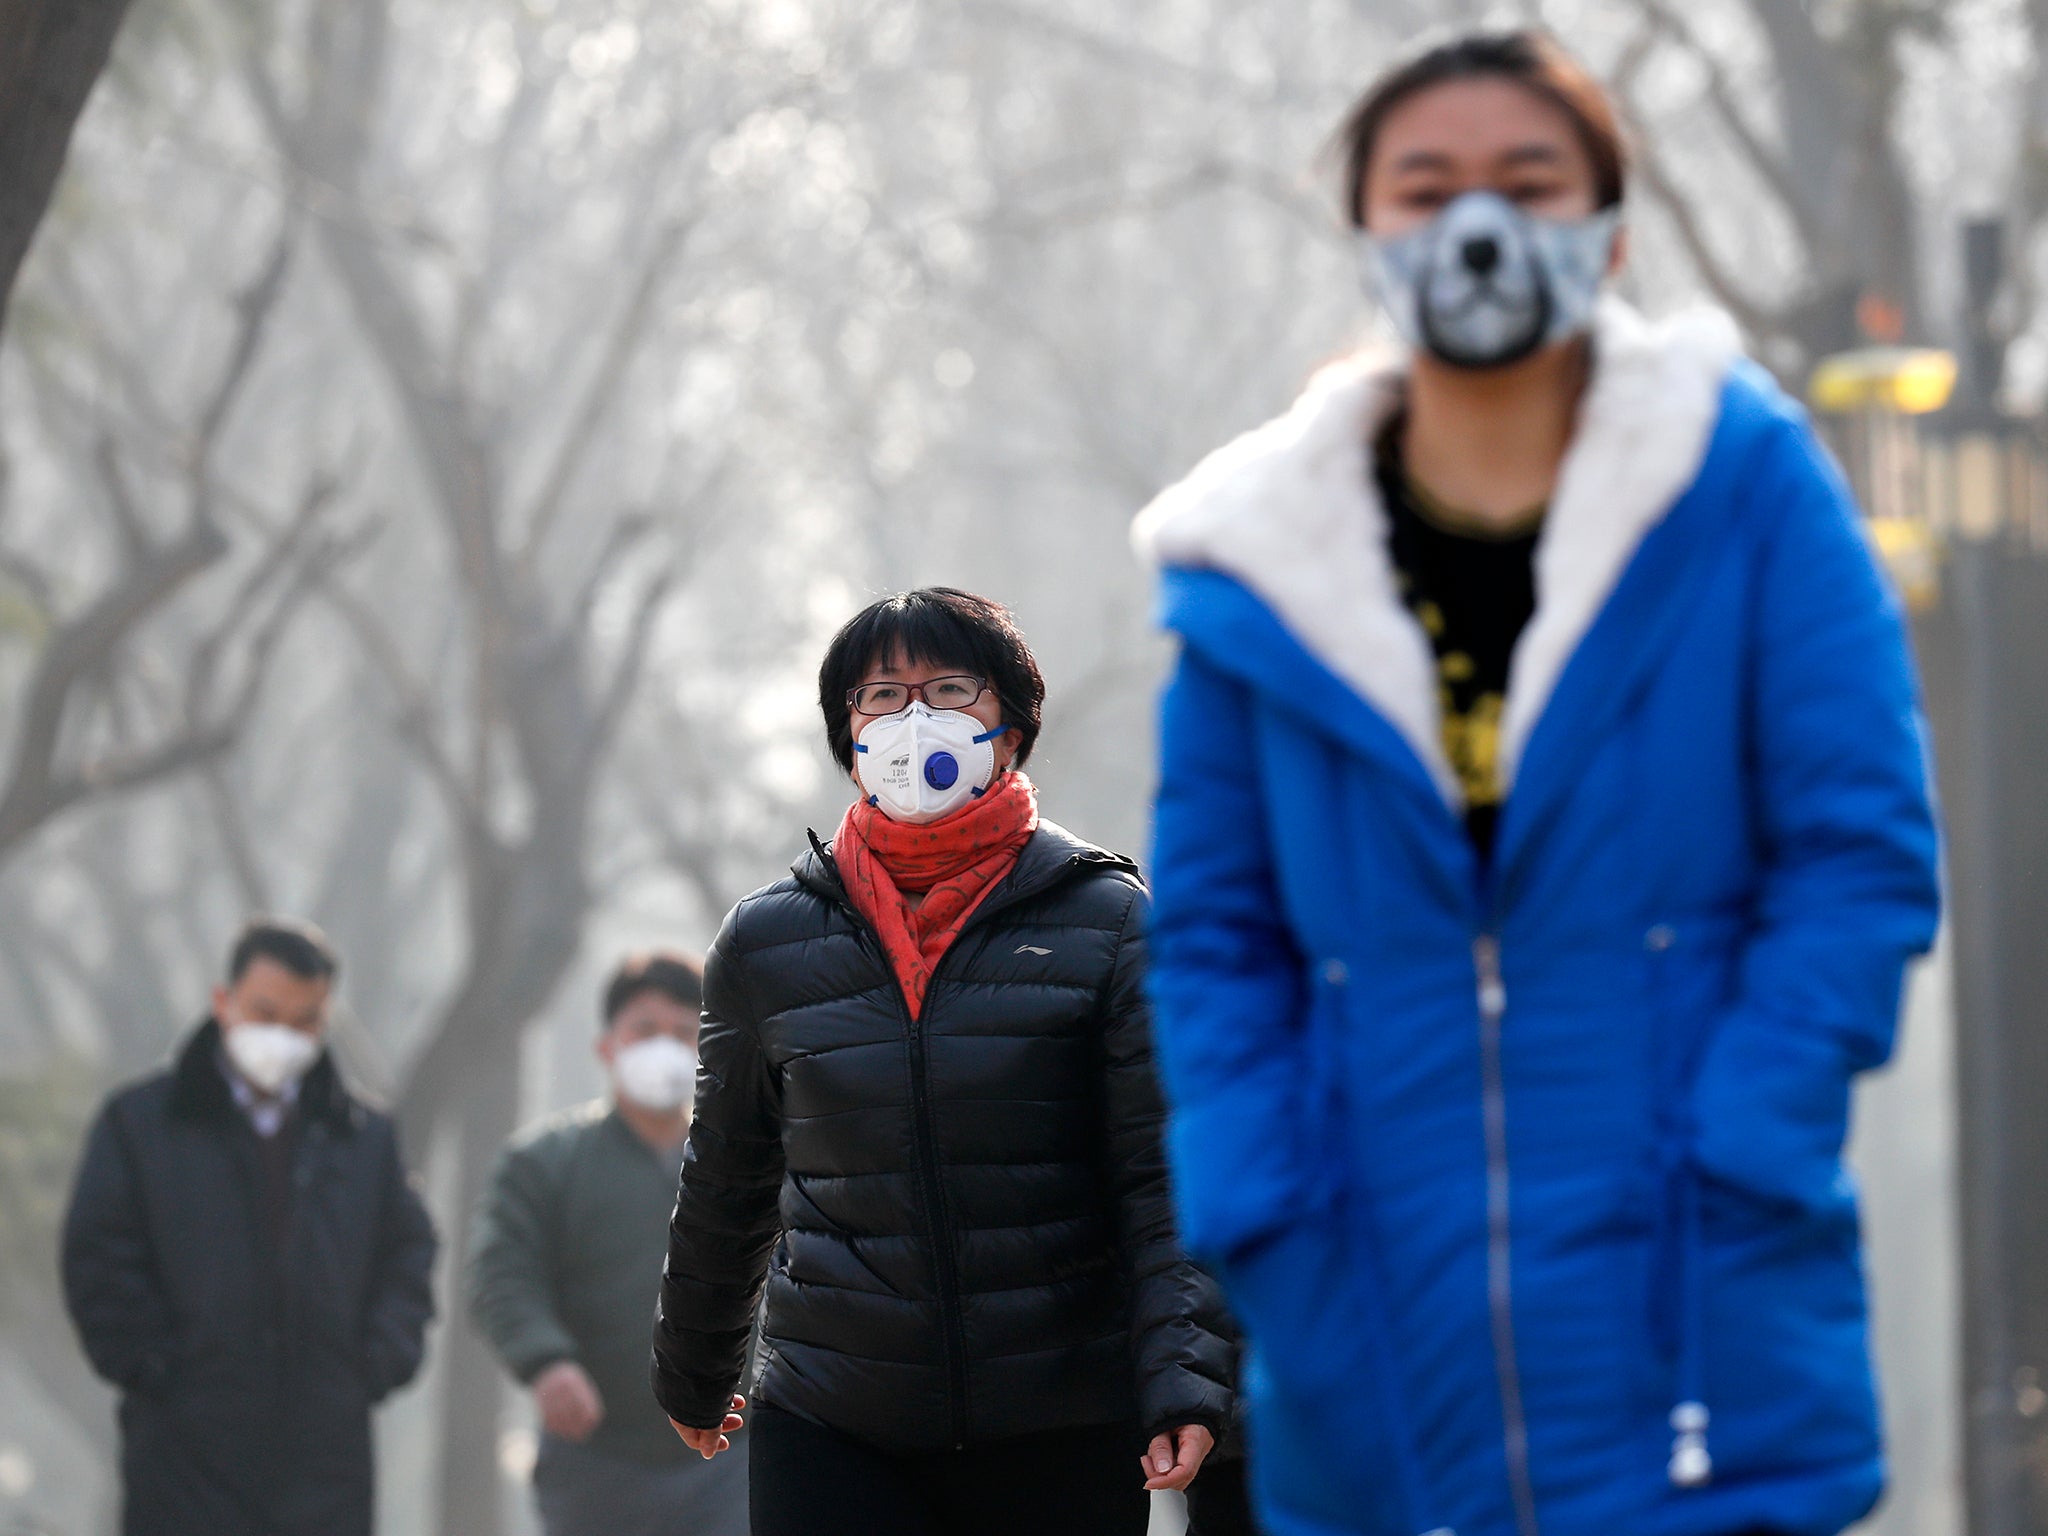 People wearing masks for protection against heavy smog walk in Beijing's Ritan Park